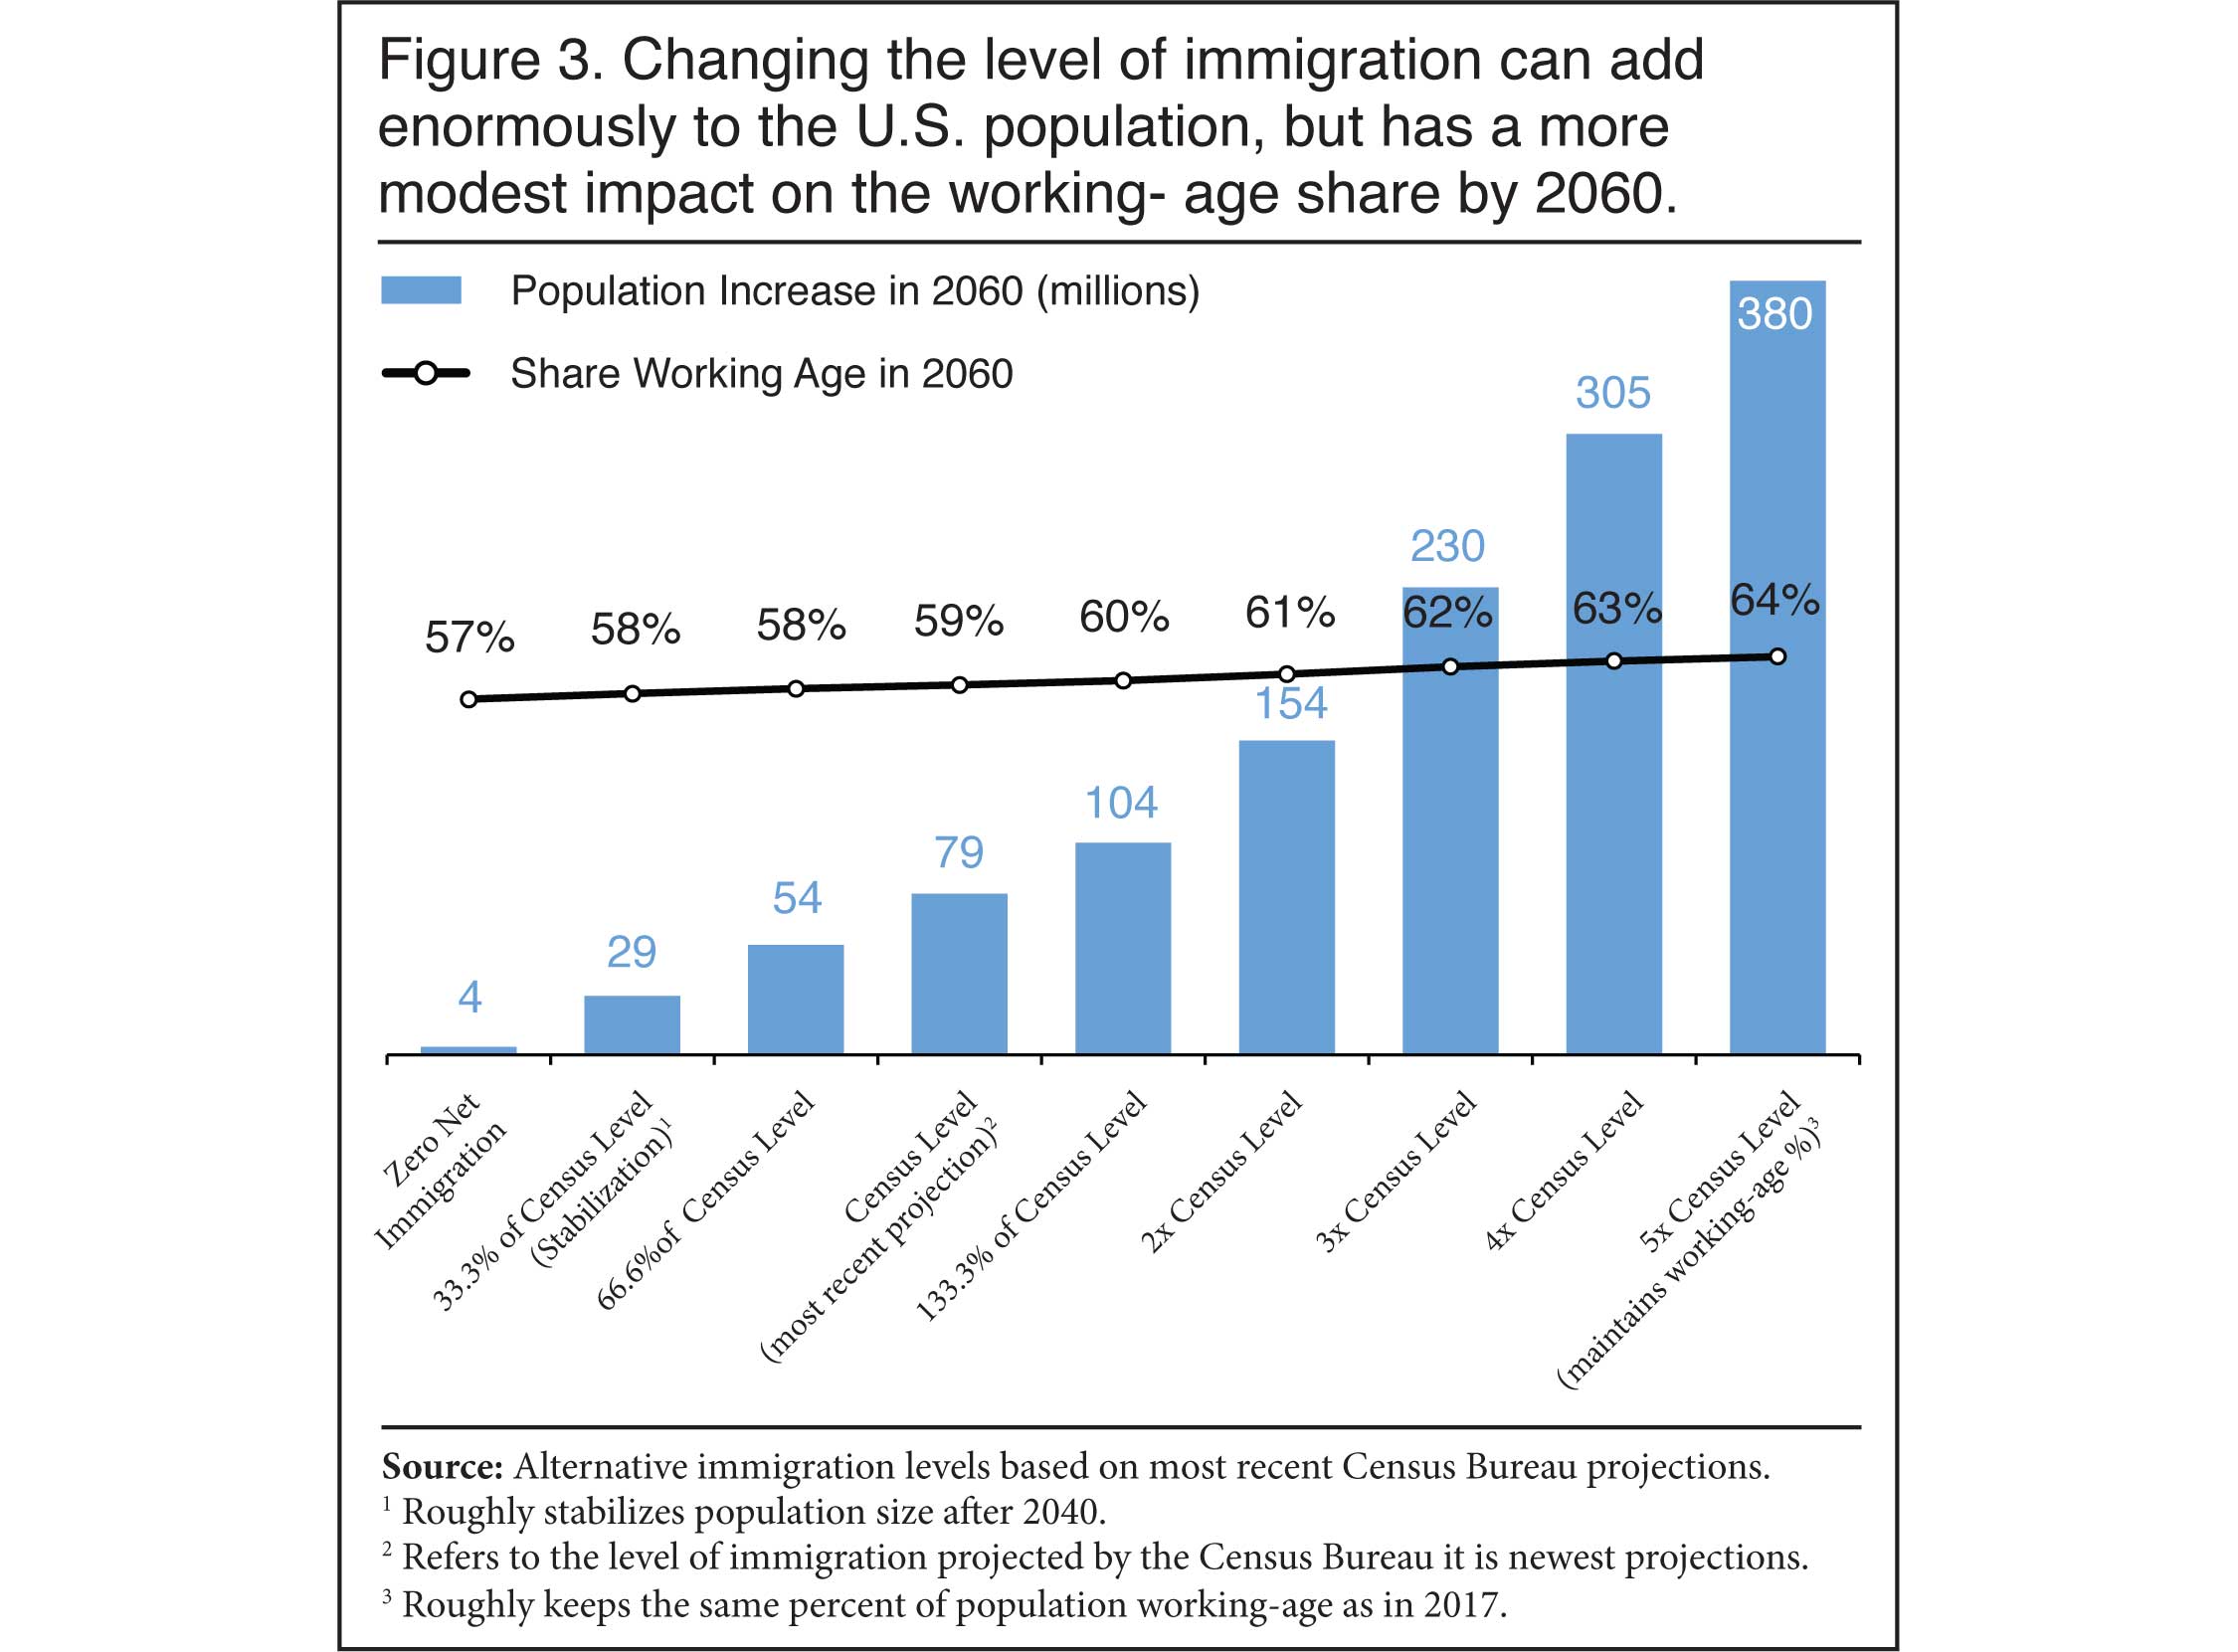 Graph: Changing the Level of Immigration Adds to US Population but Modest Impact on Working Age Share.